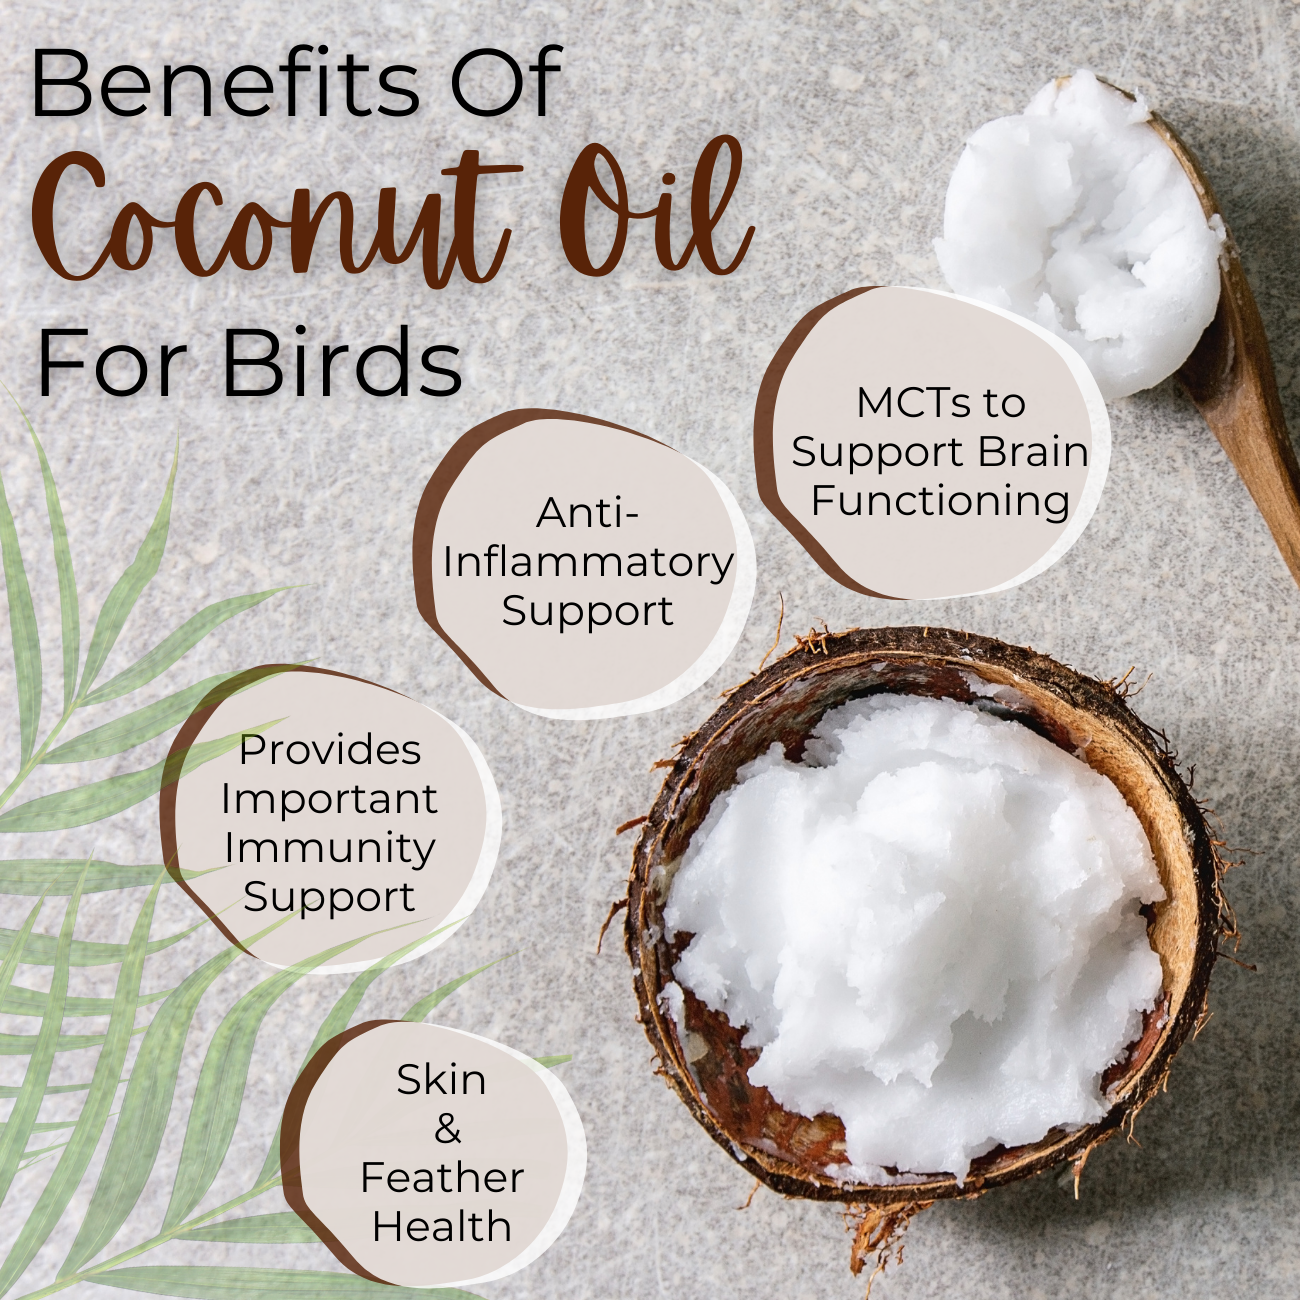 Benefits of coconut oil for birds